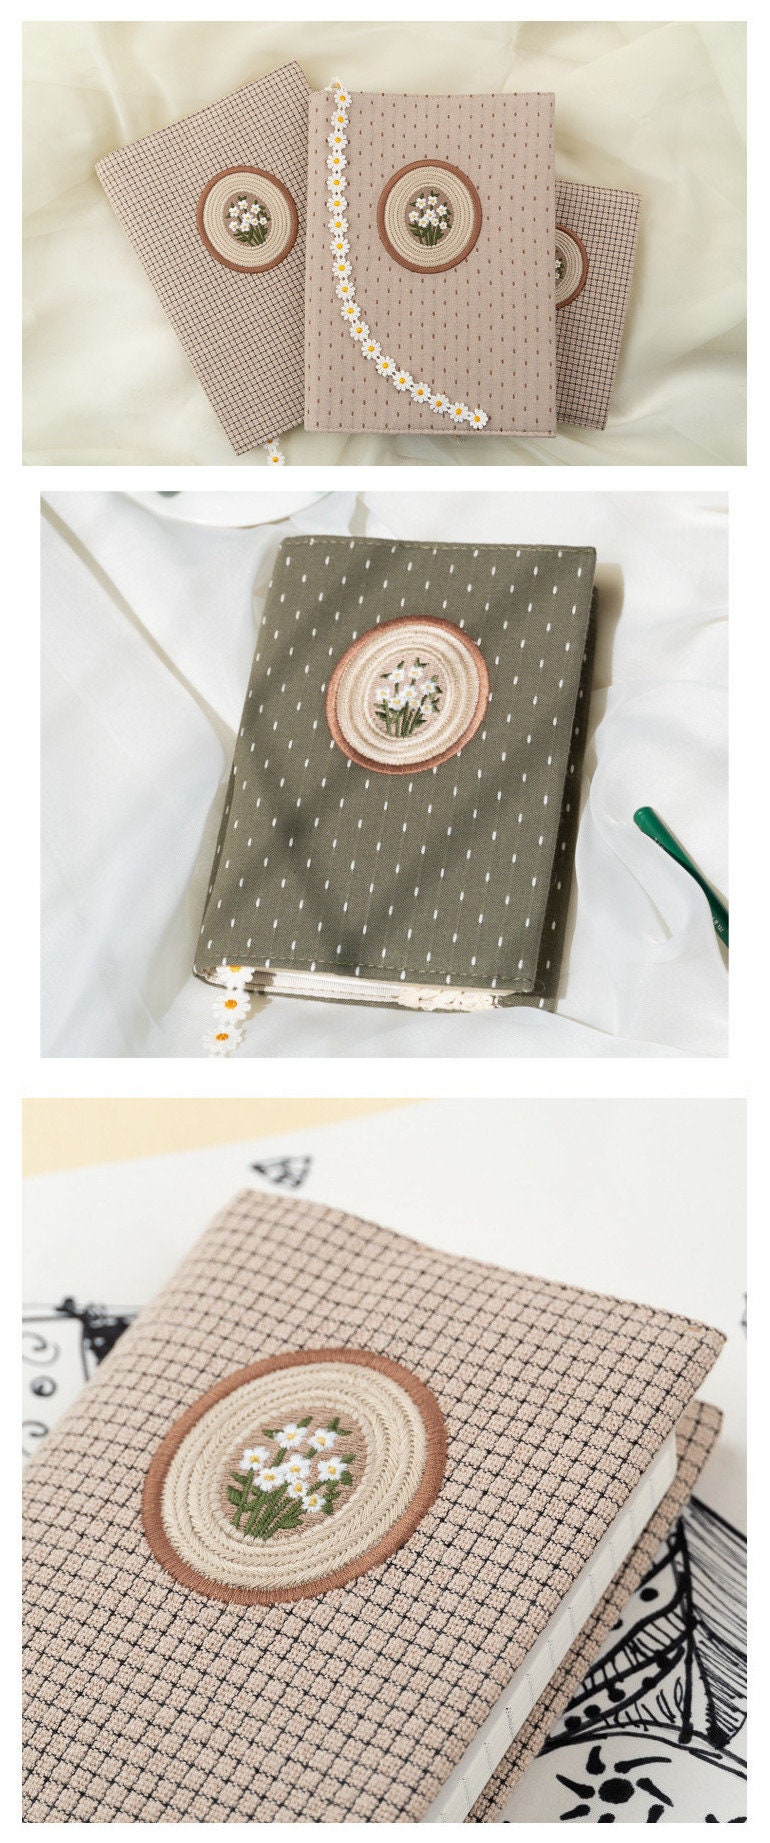 Daisy Embroidered Notebook Cover Raindrop Grid Handmade Fabric Journal Retro Adjustable A5 A6 B6 Journal Sleeve Literary Graduation Gift